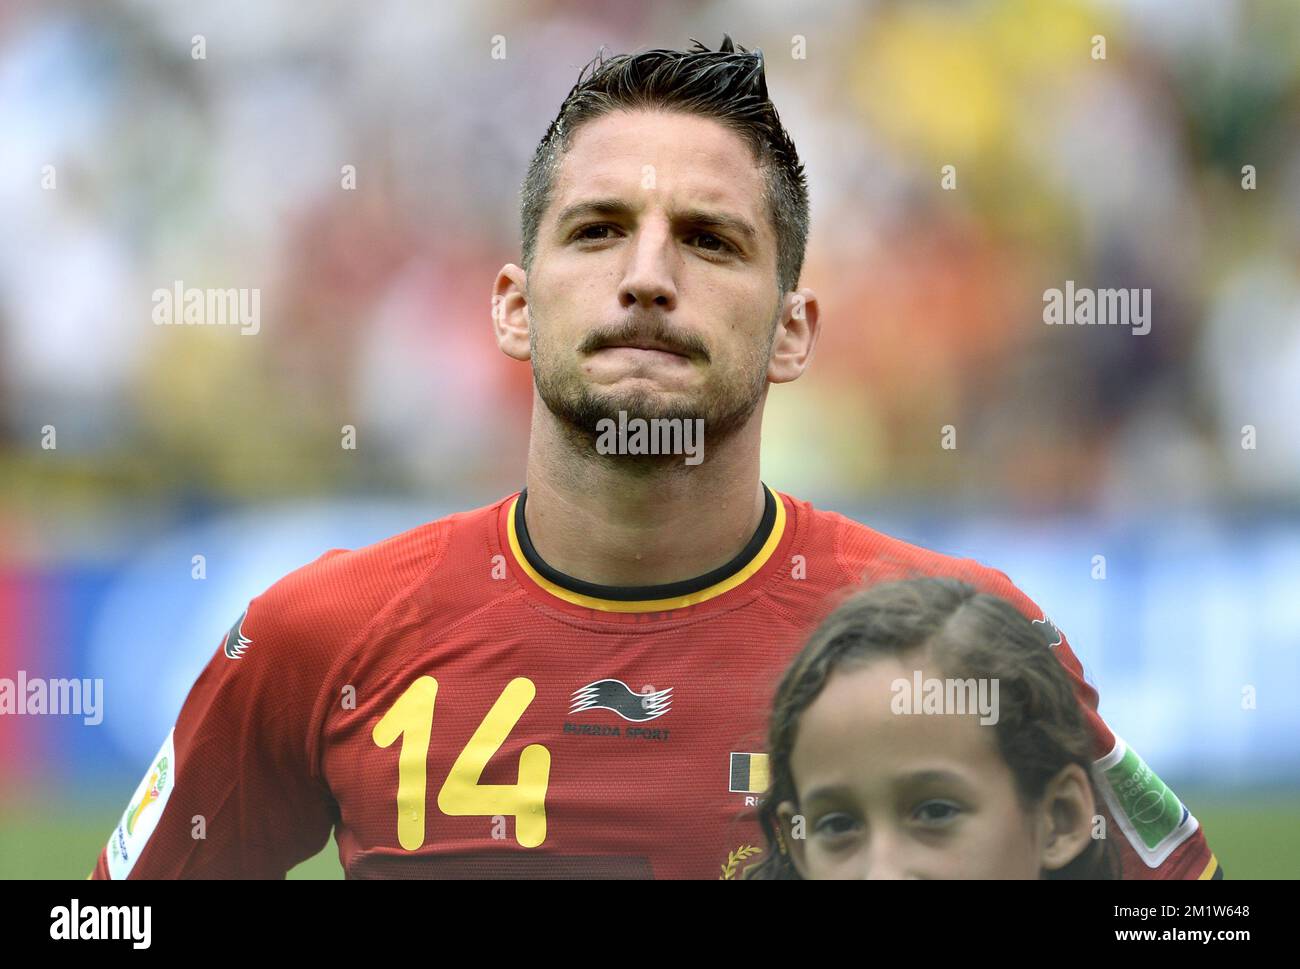 20140622 - RIO DE JANEIRO, BRAZIL: Belgium's Dries Mertens pictured during a soccer game between Belgian national team The Red Devils and Russia in Rio de Janeiro, Brazil, the second game in Group H of the first round of the 2014 FIFA World Cup, Sunday 22 June 2014.   BELGA PHOTO DIRK WAEM Stock Photo